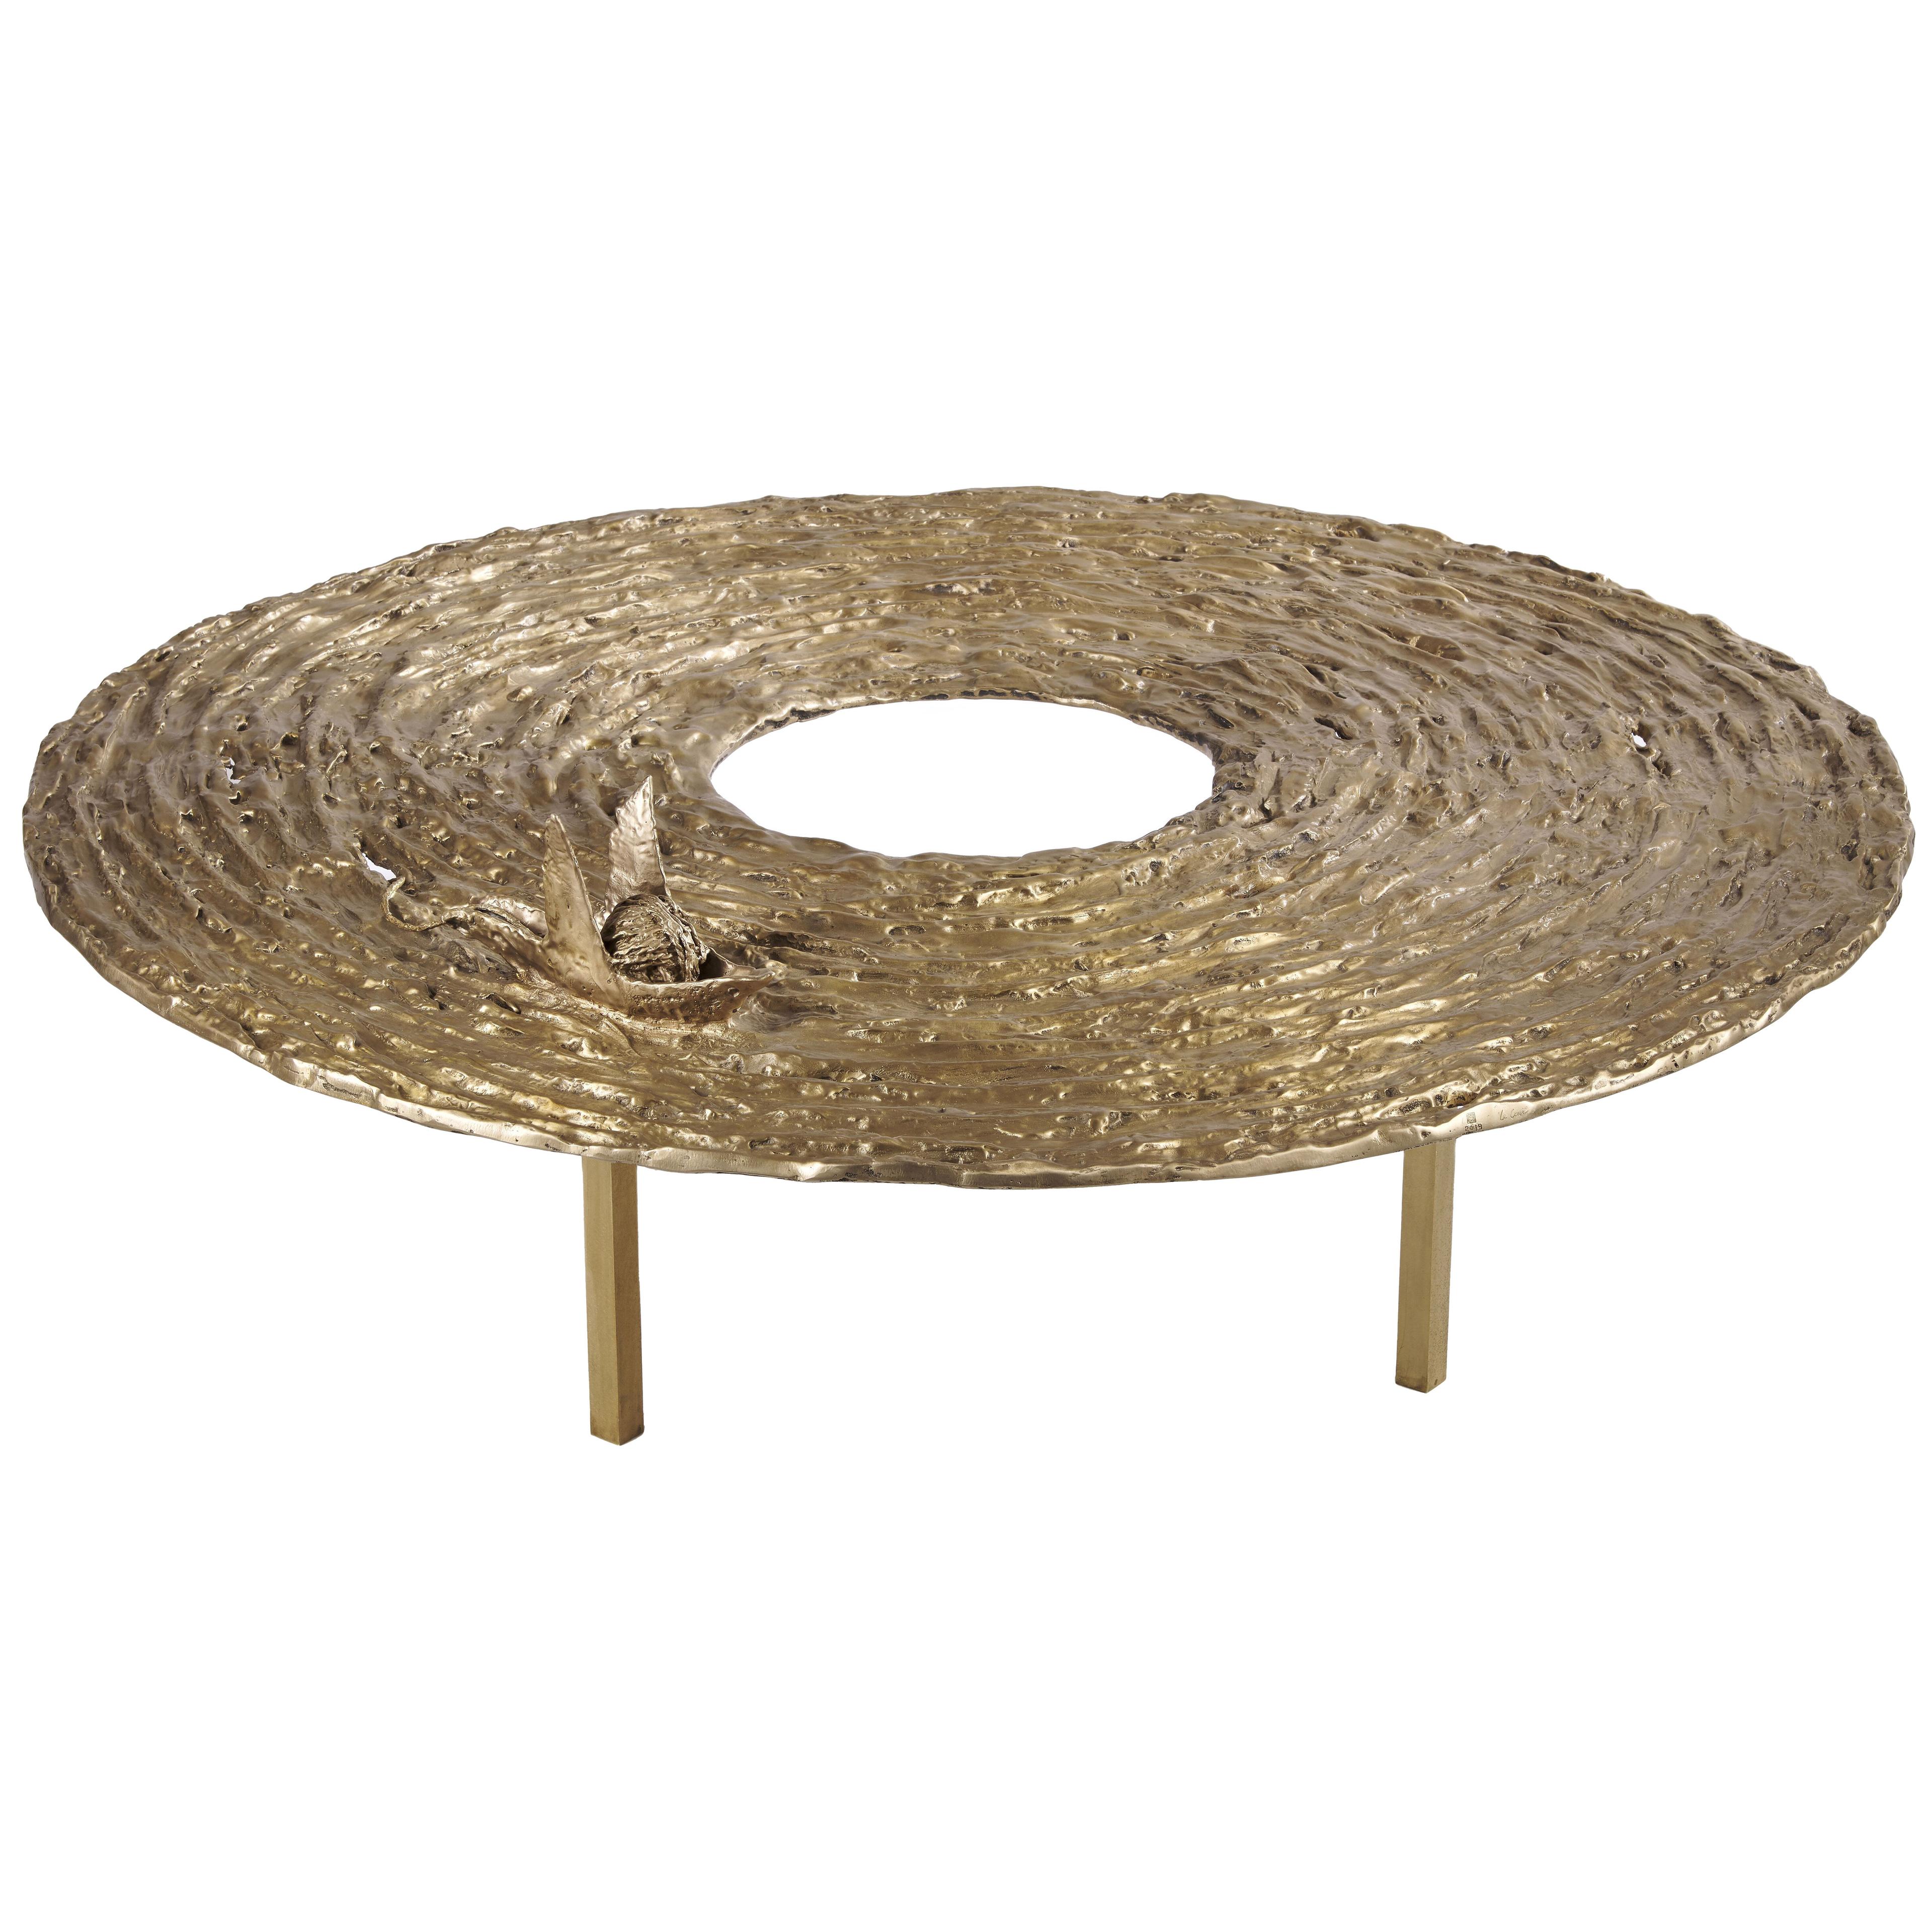 "Le fil d'Ariane" Bronze Table, by Hubert Le Gall, Limited Edition, 2020